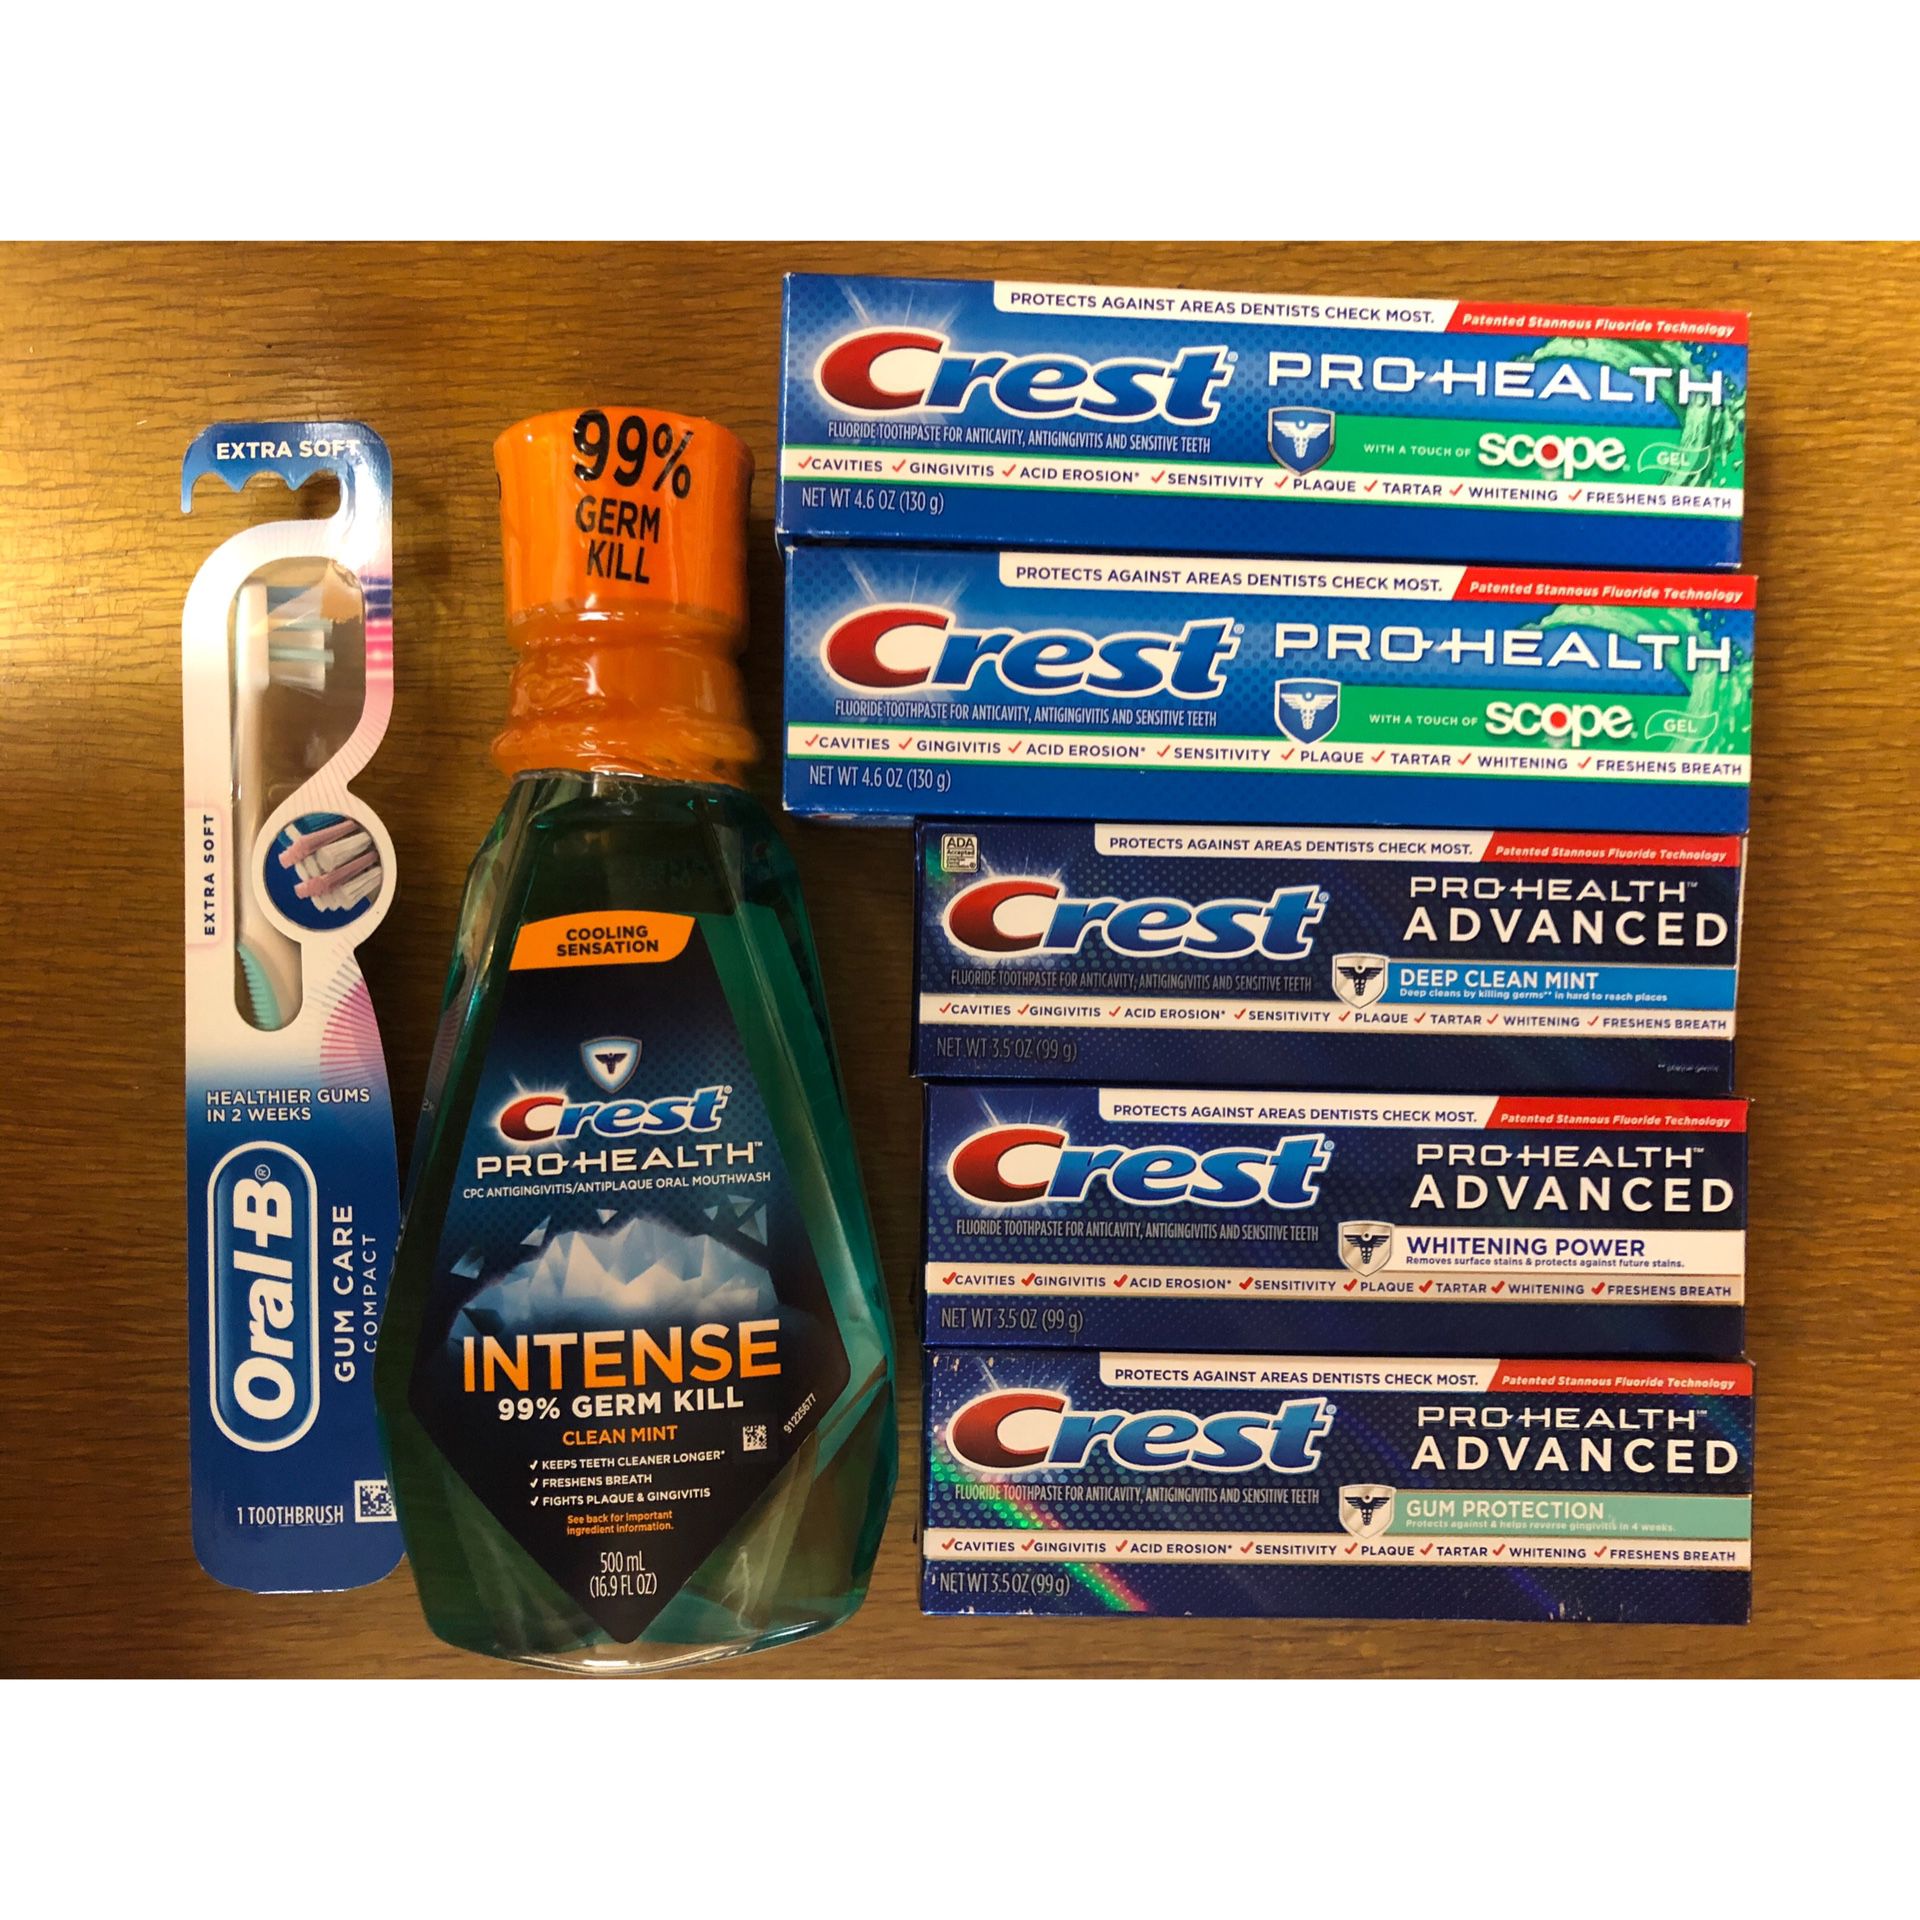 Crest toothpaste, mouthwash, Oral-B toothbrush